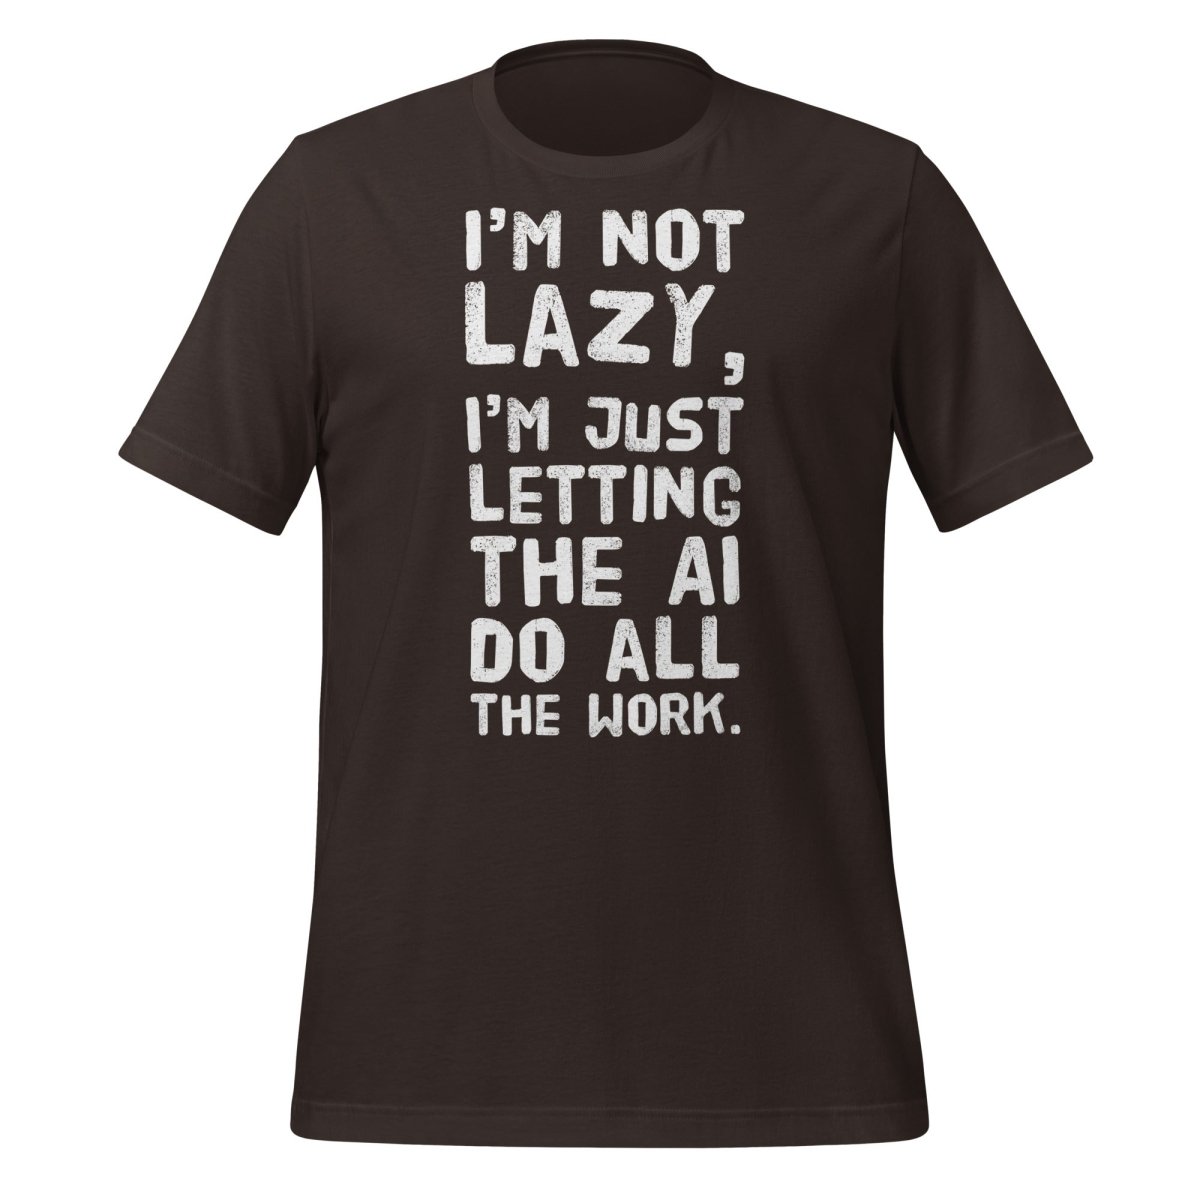 I'm Not Lazy T - Shirt (unisex) - Brown - AI Store